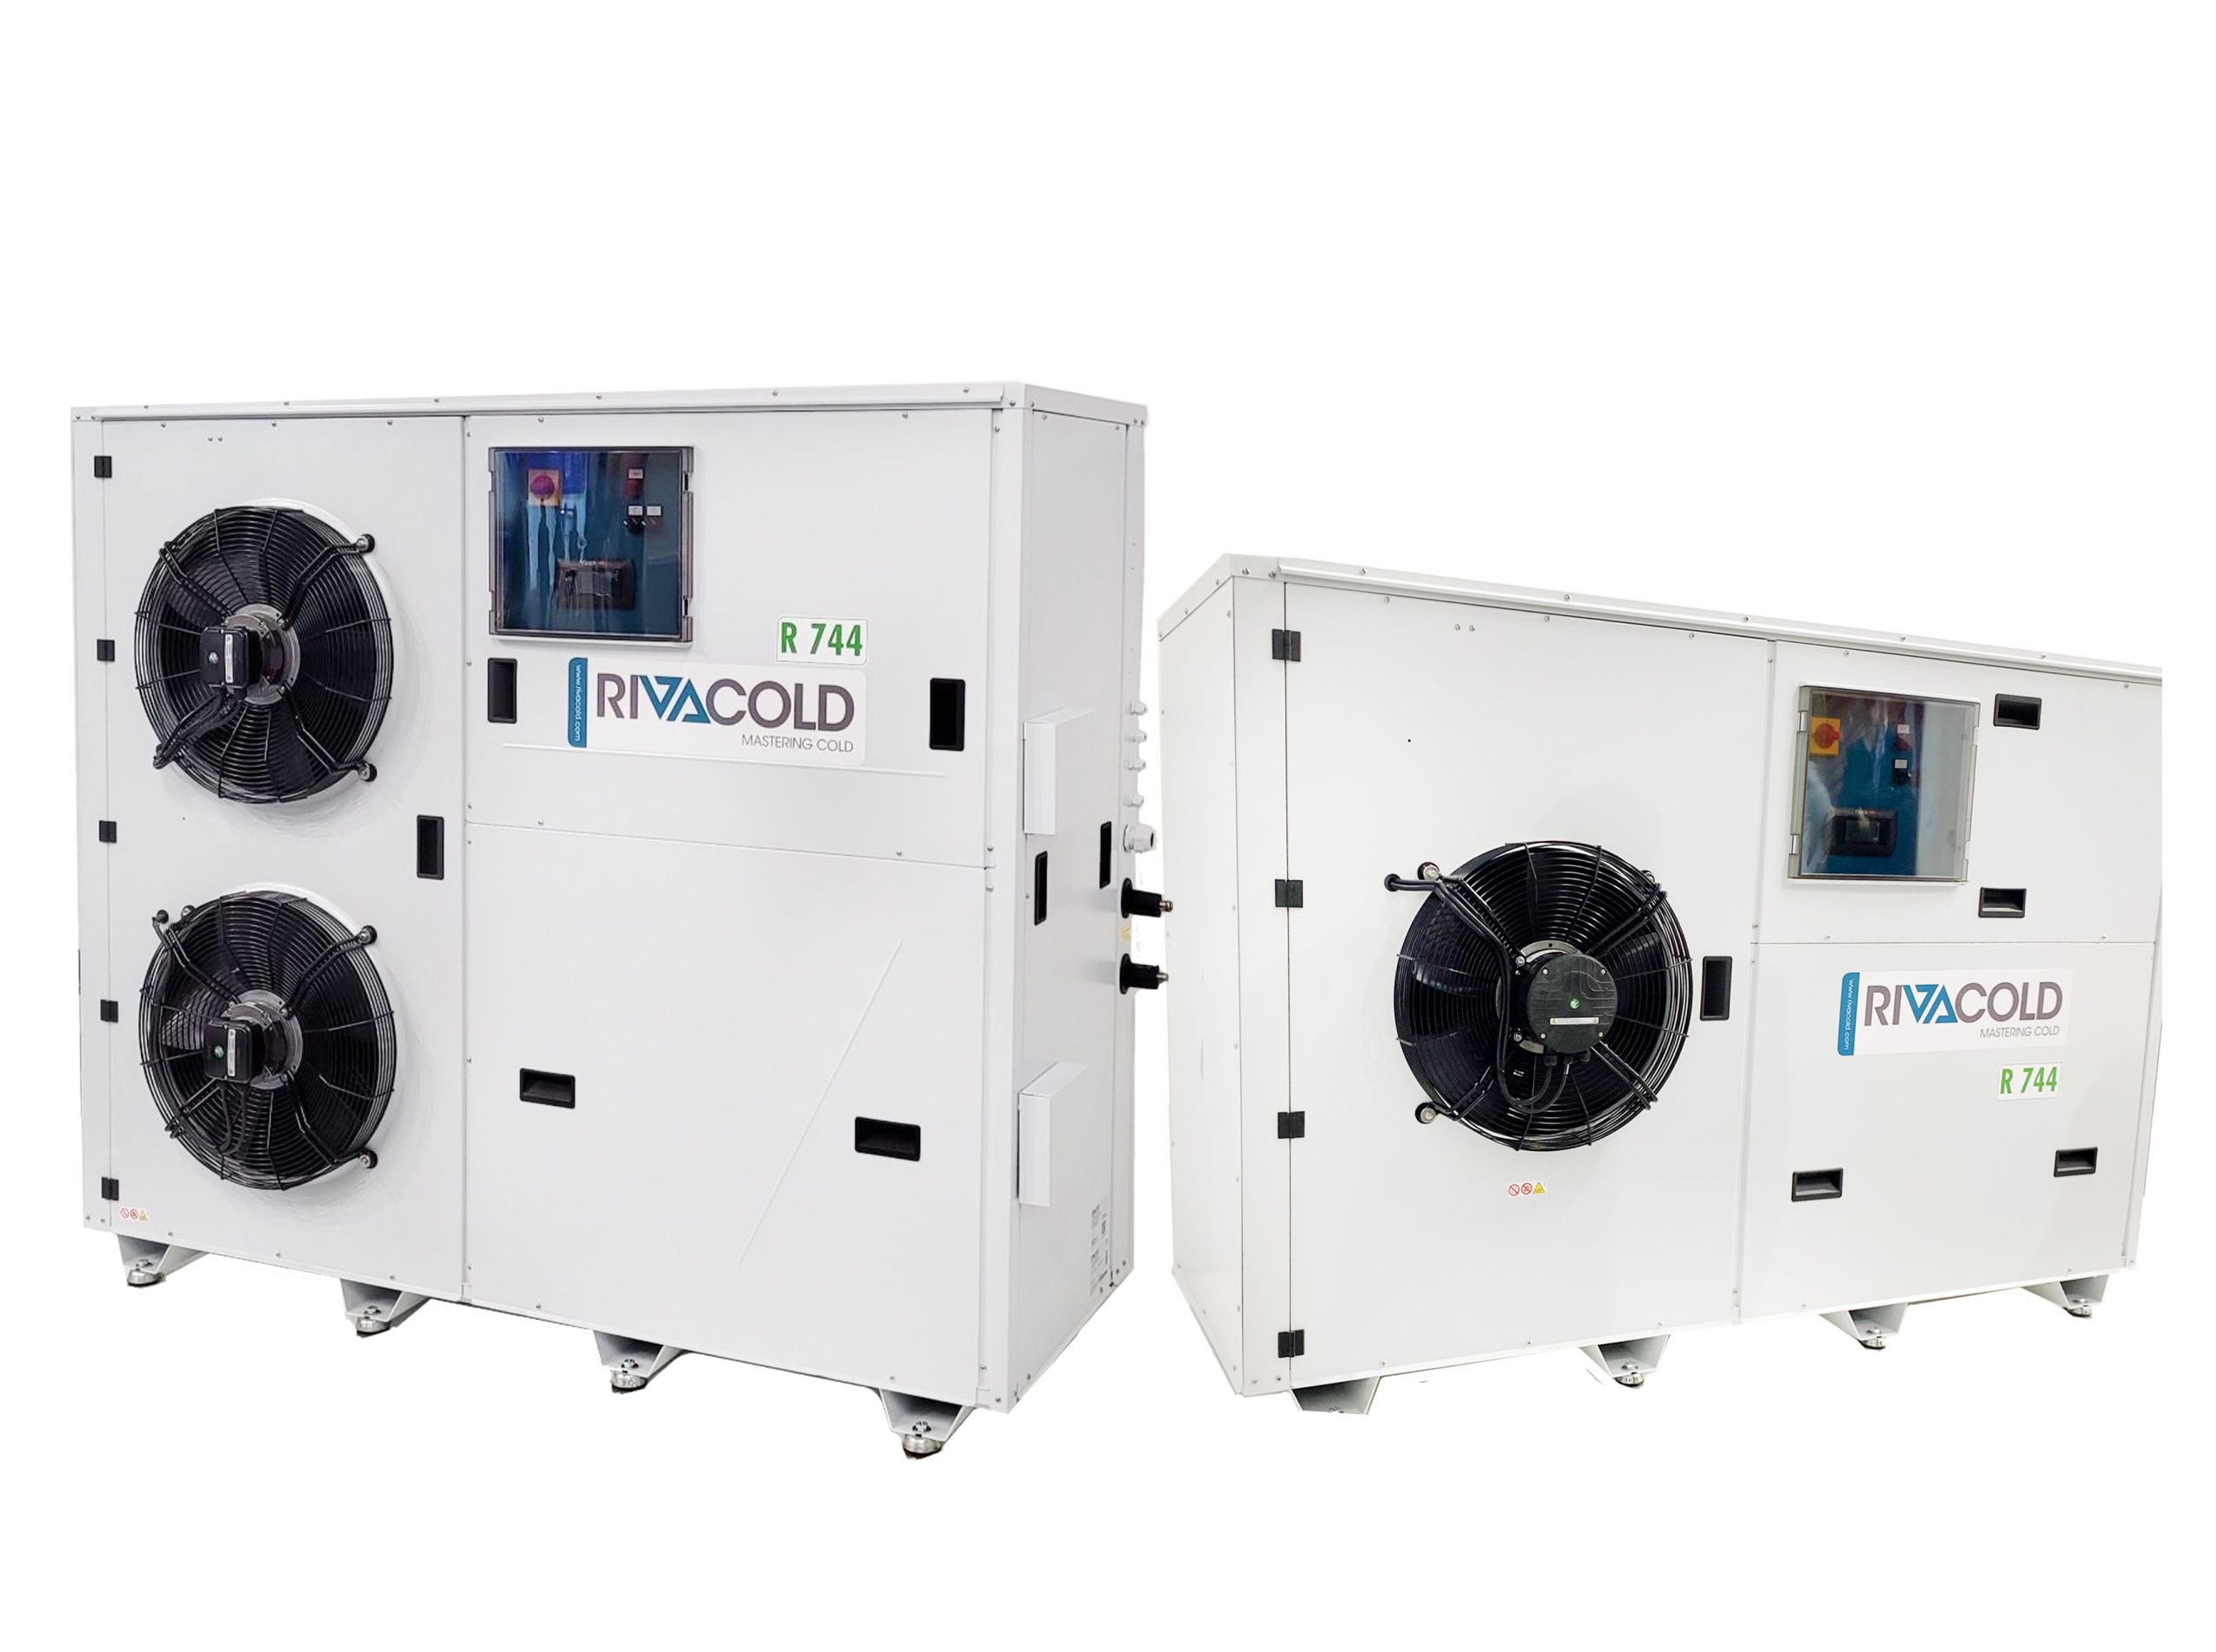 New condensing units with R744